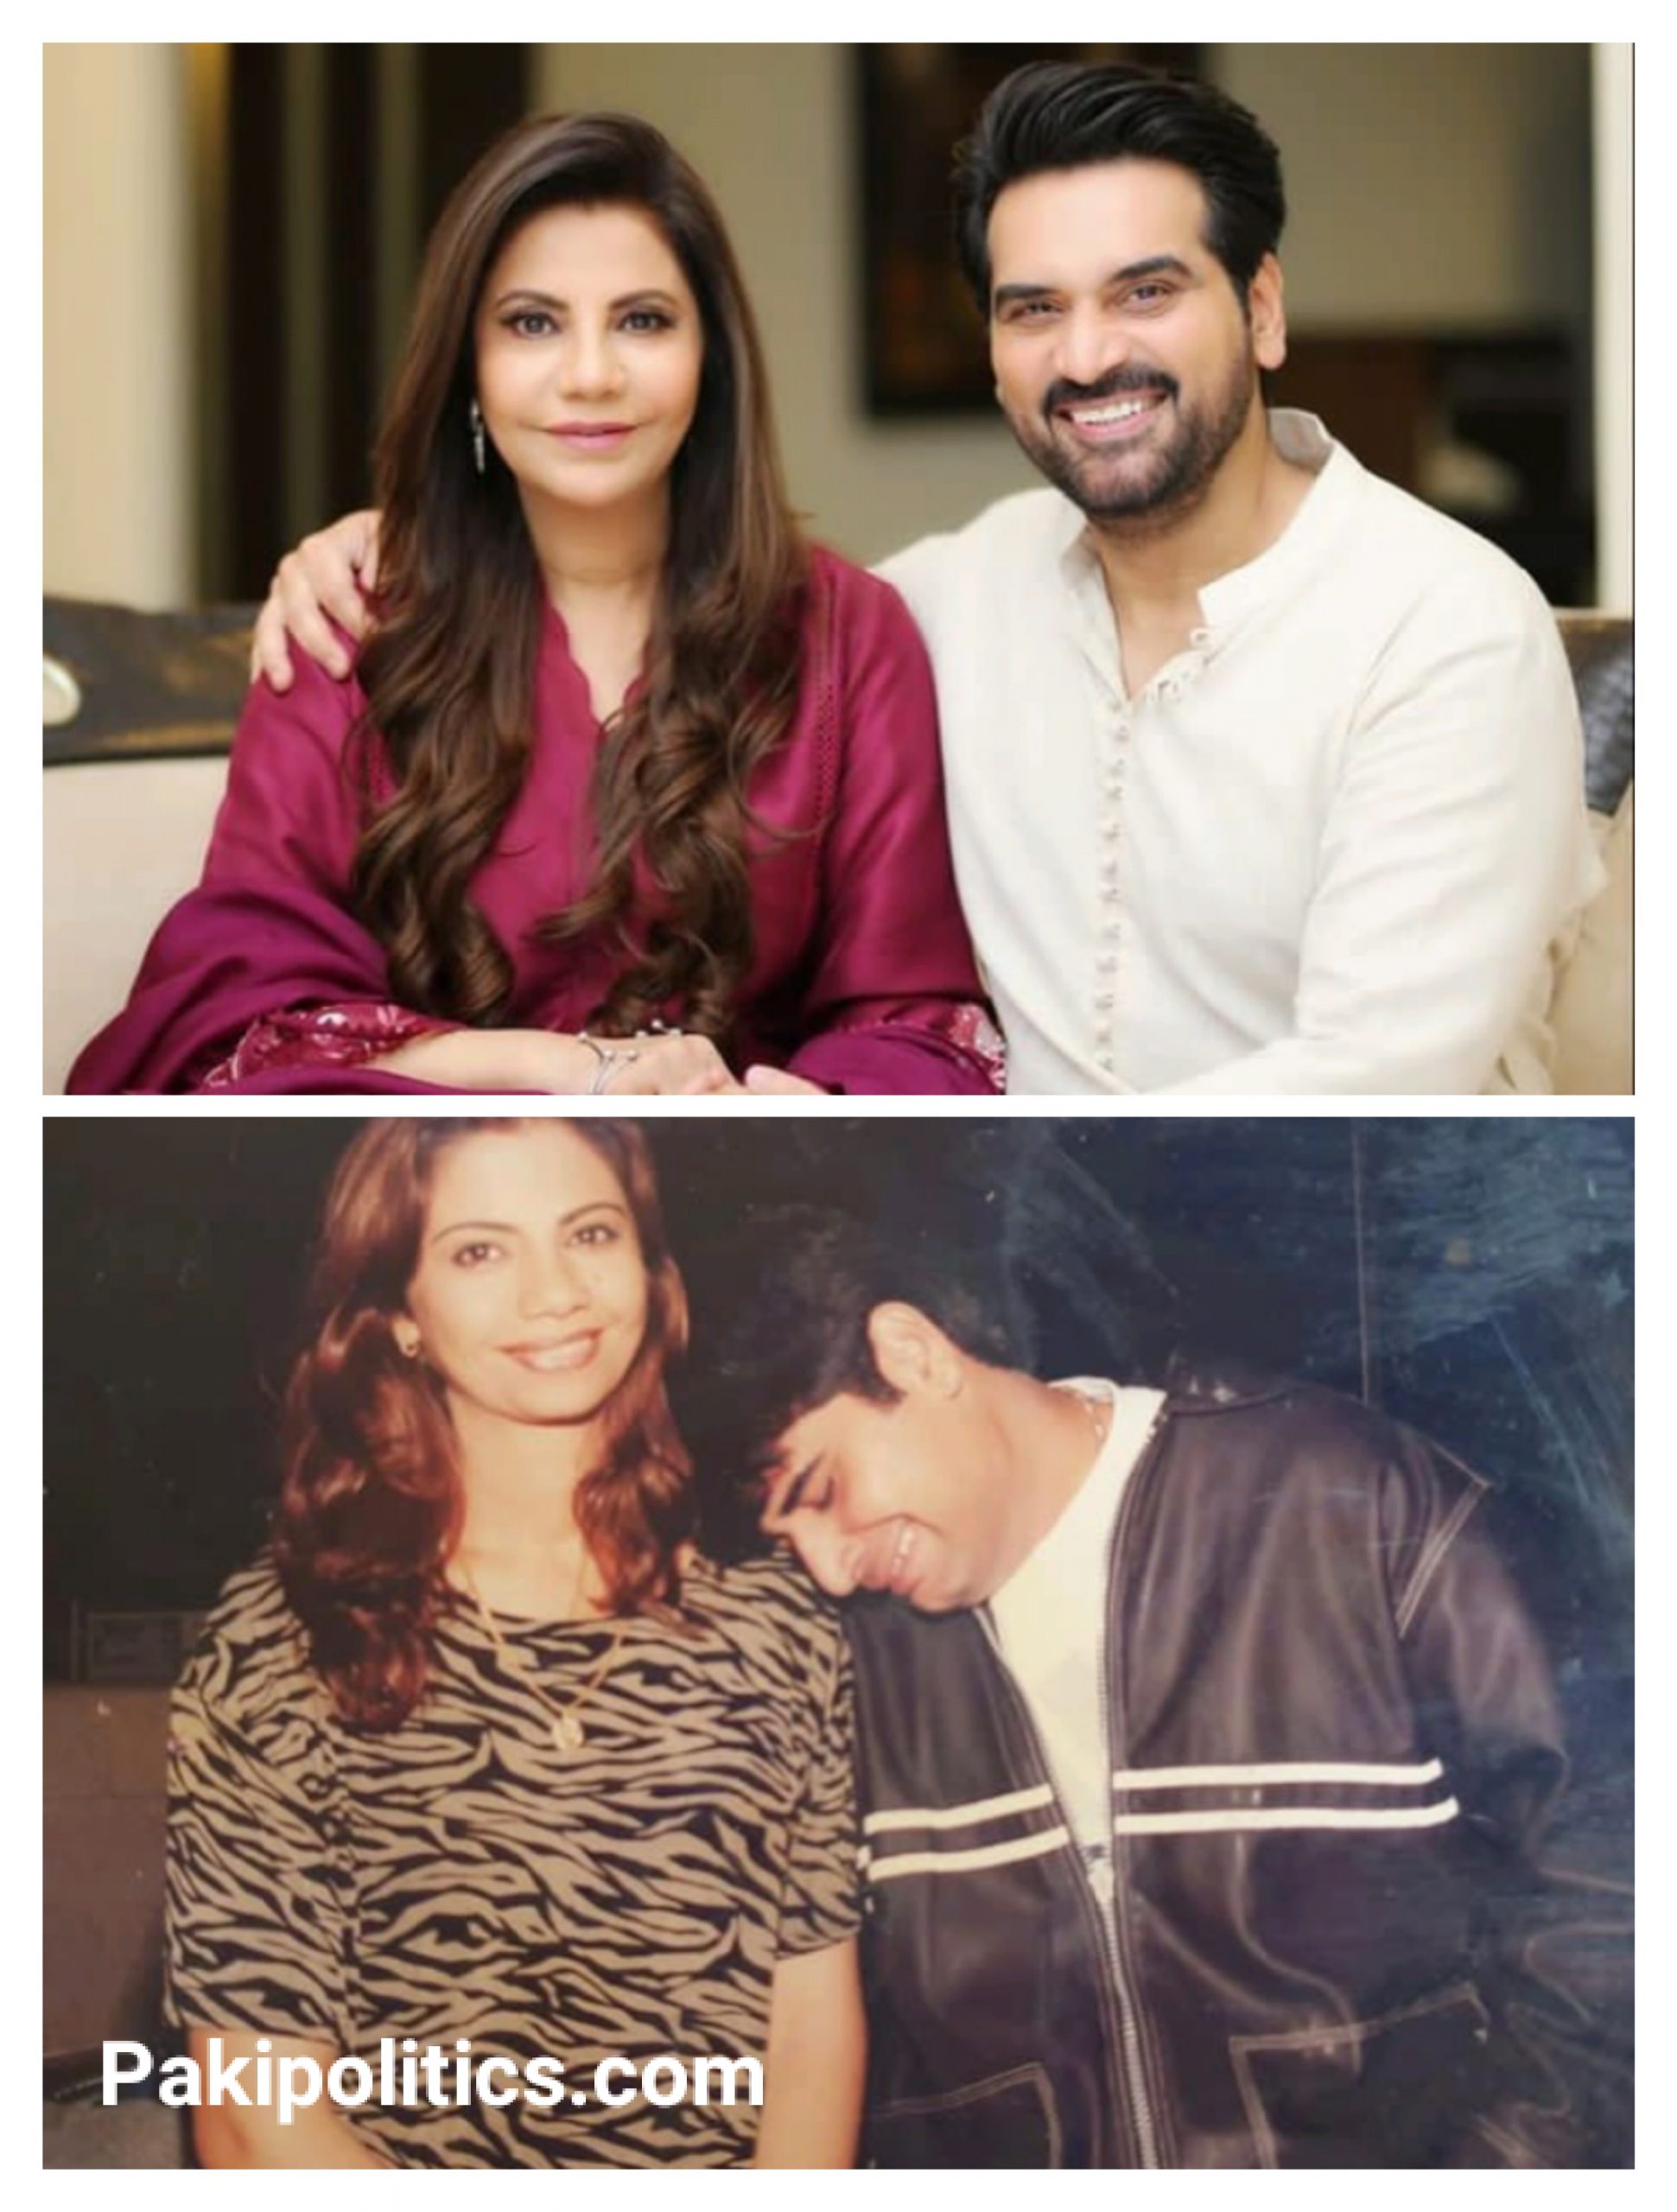 Famous Pakistani actor-director Humayun Saeed congratulates his wife on her birthday.